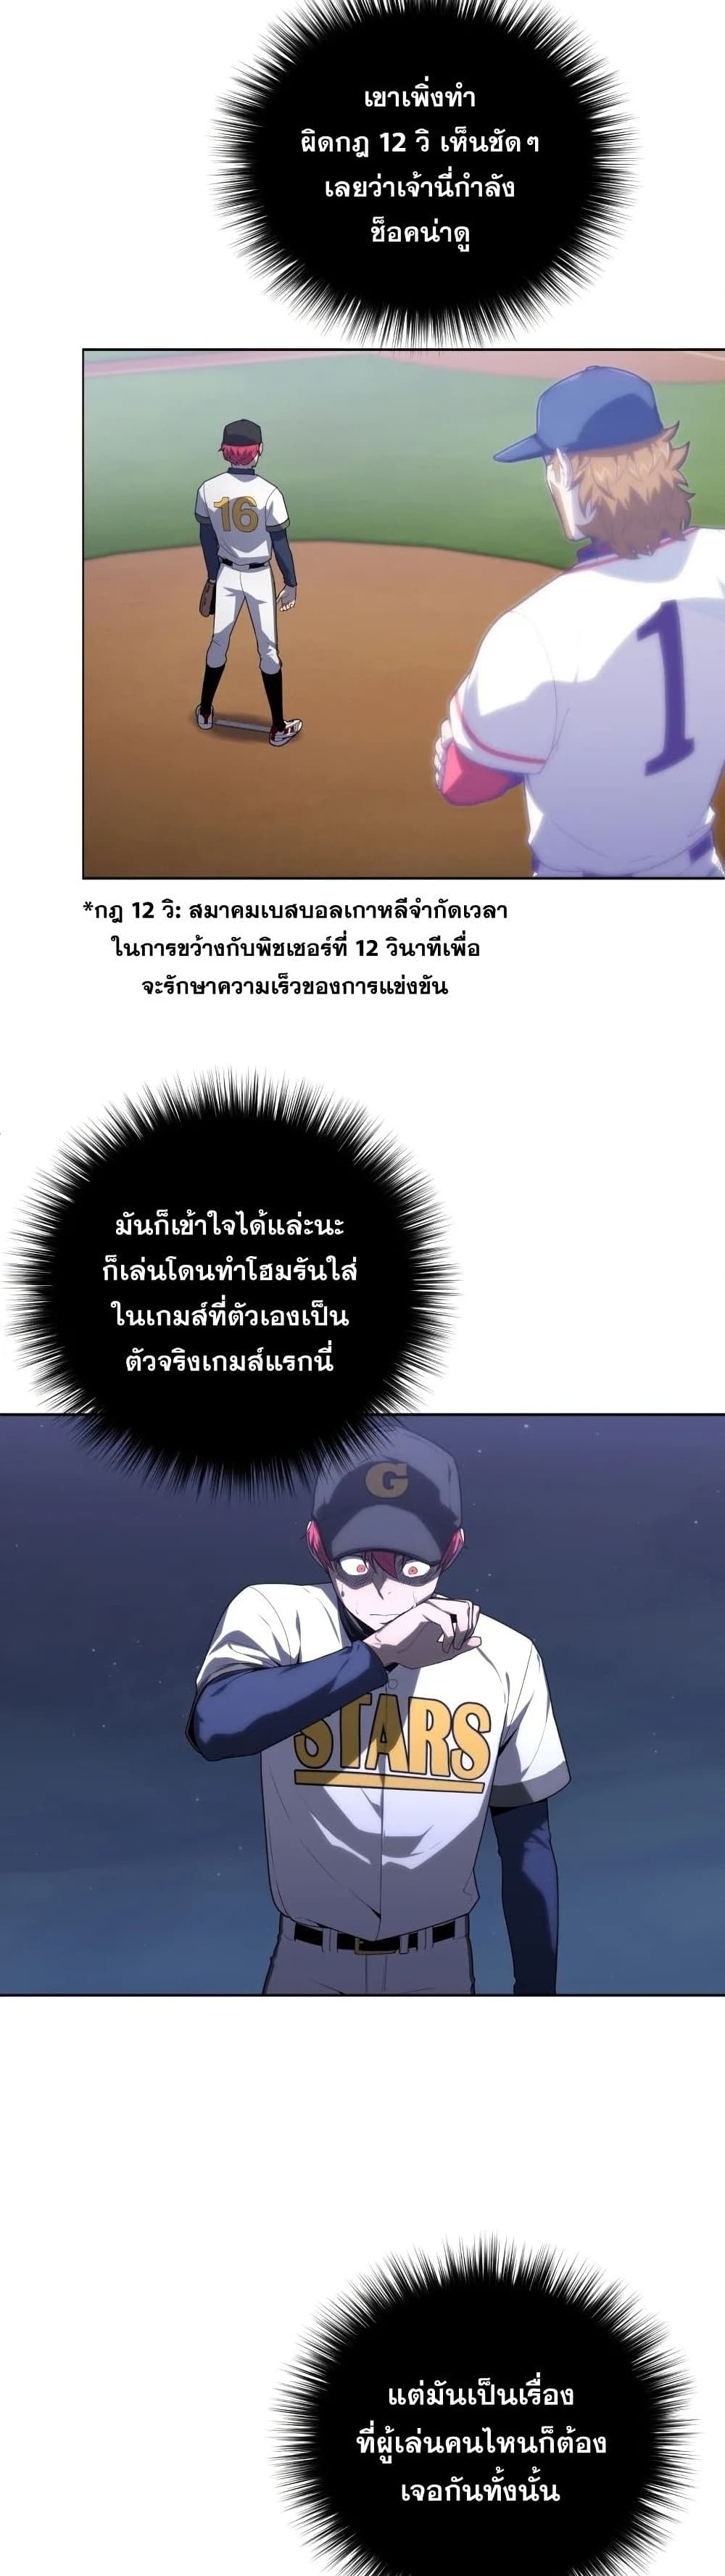 King of the Mound ตอนที่ 17 (6)